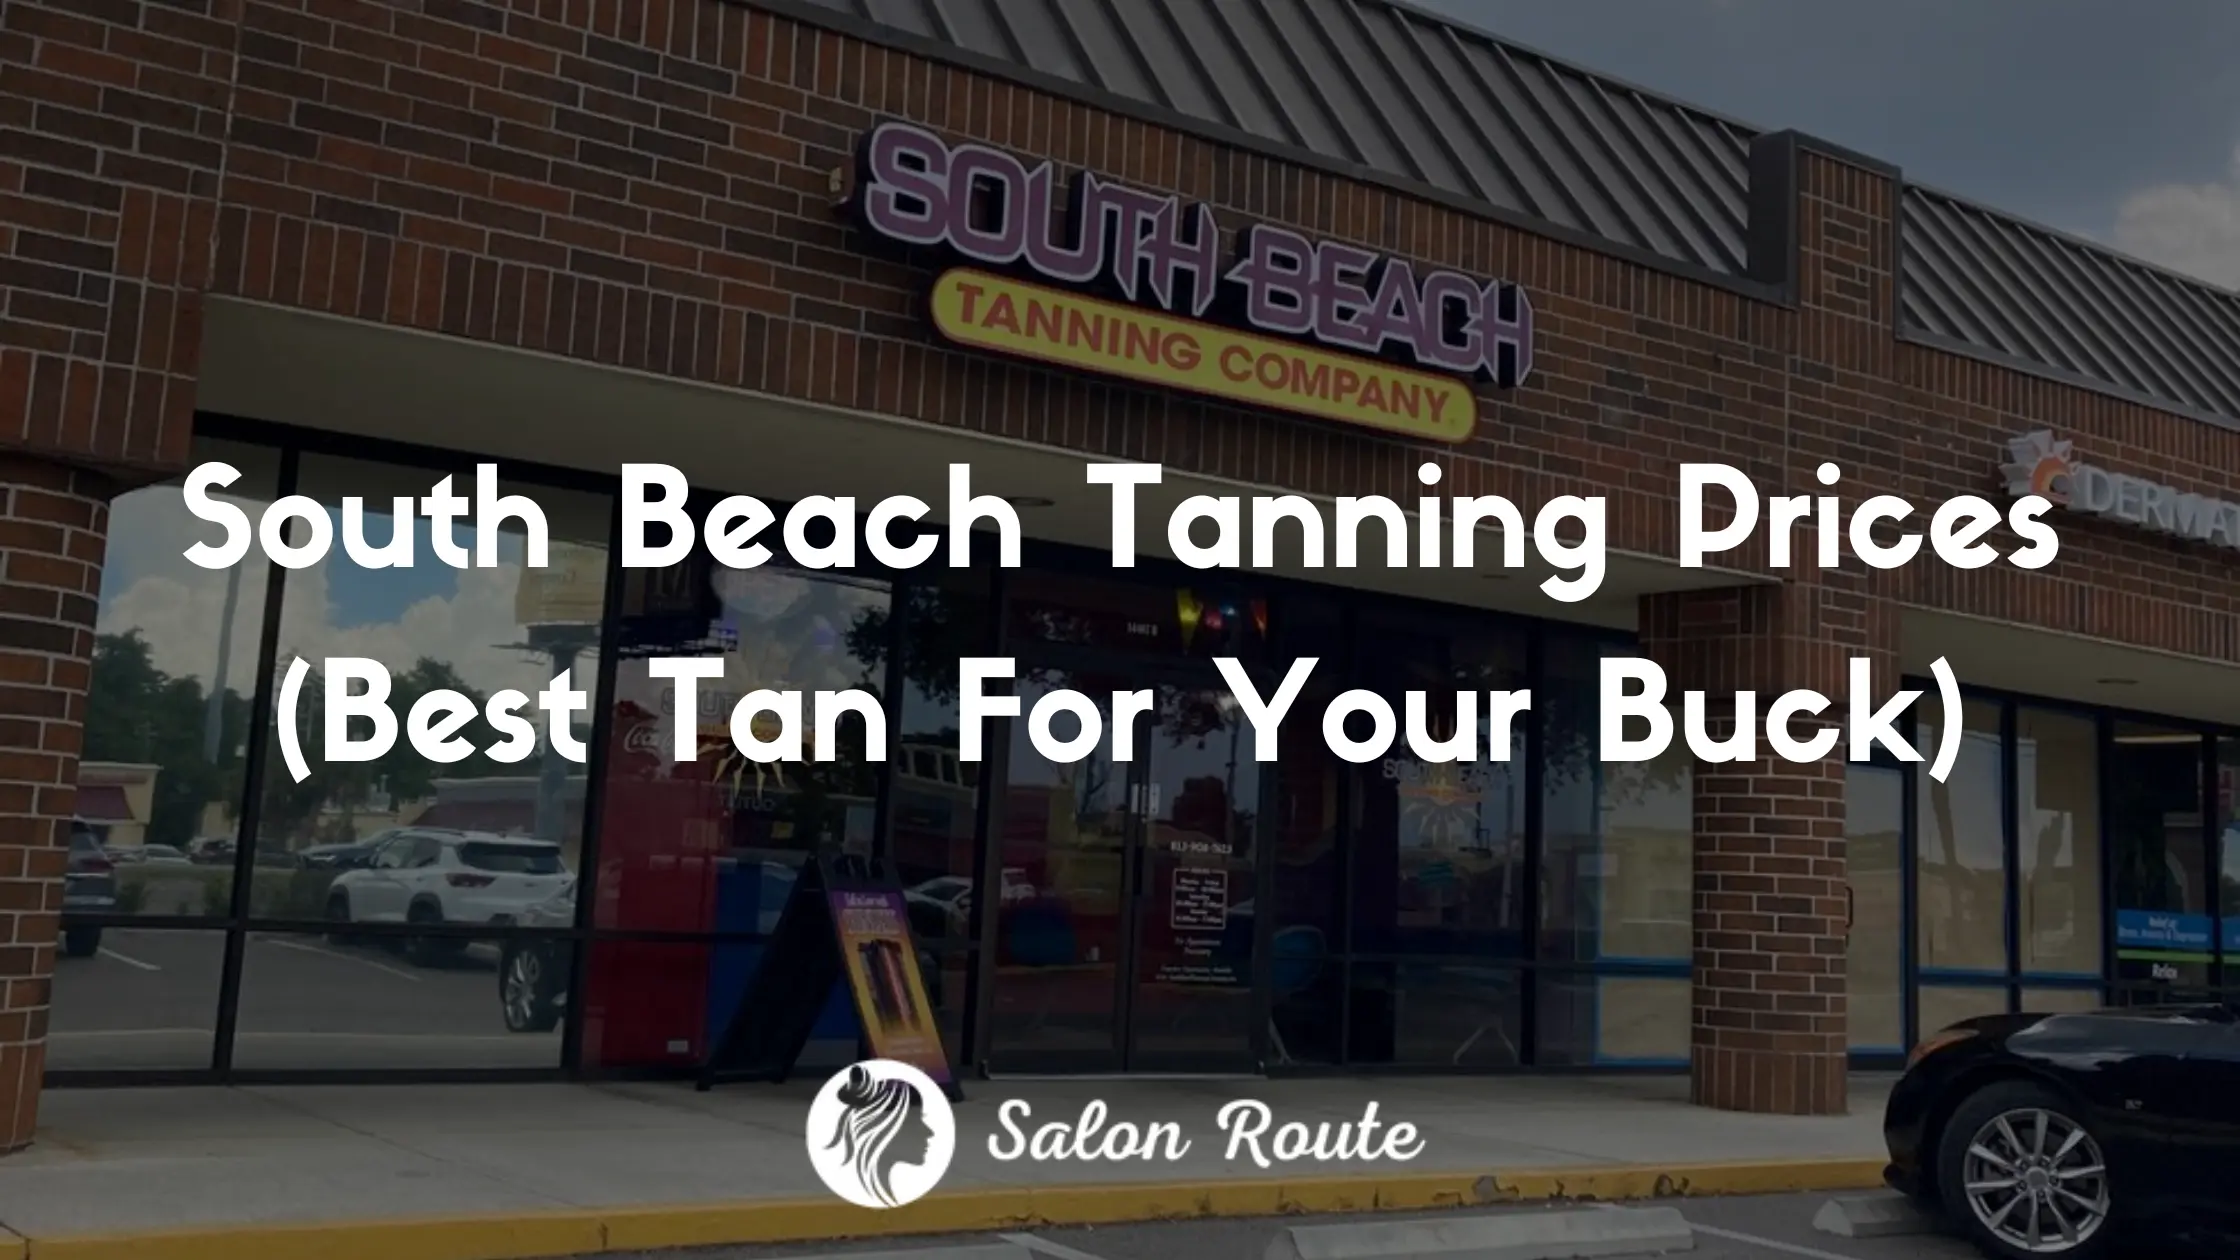 South Beach Tanning Prices (Best Tan For Your Buck)